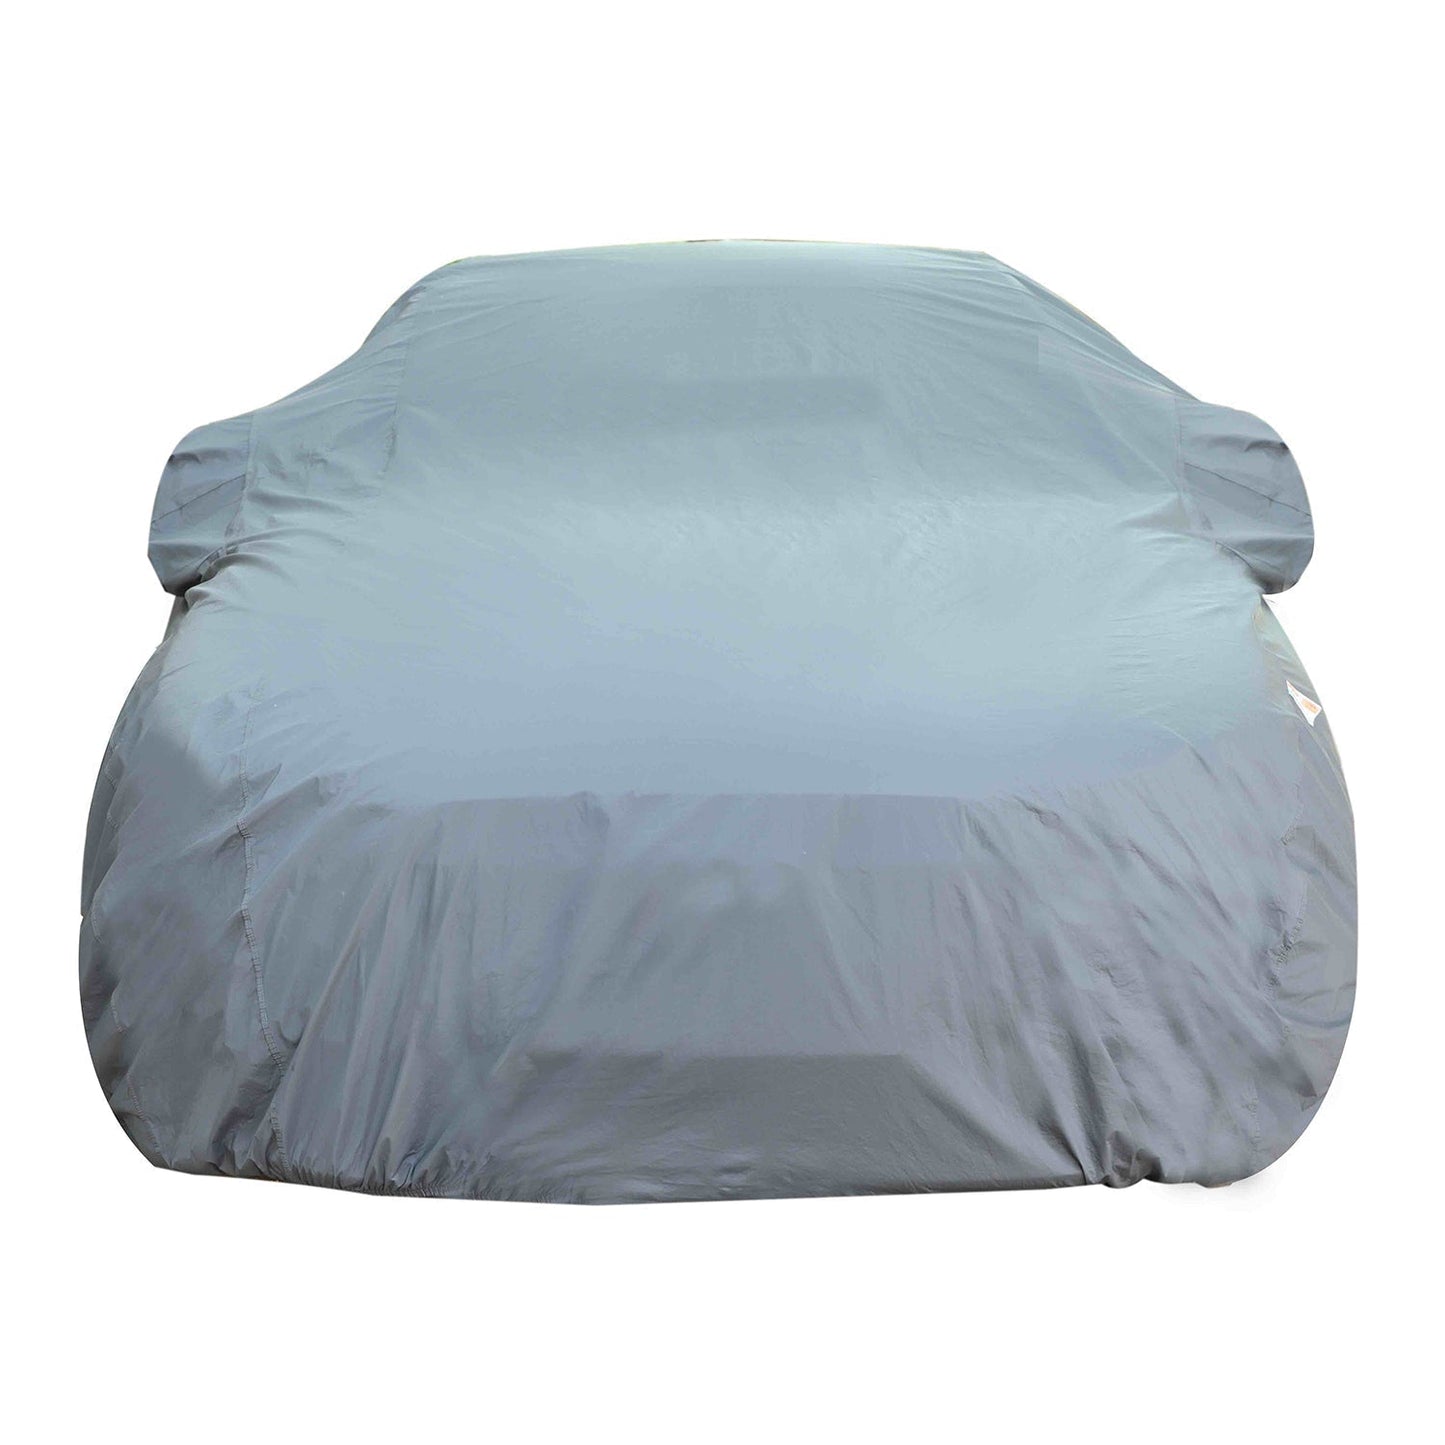 Oshotto Dark Grey 100% Anti Reflective, dustproof and Water Proof Car Body Cover with Mirror Pockets For Hyundai Grand i10